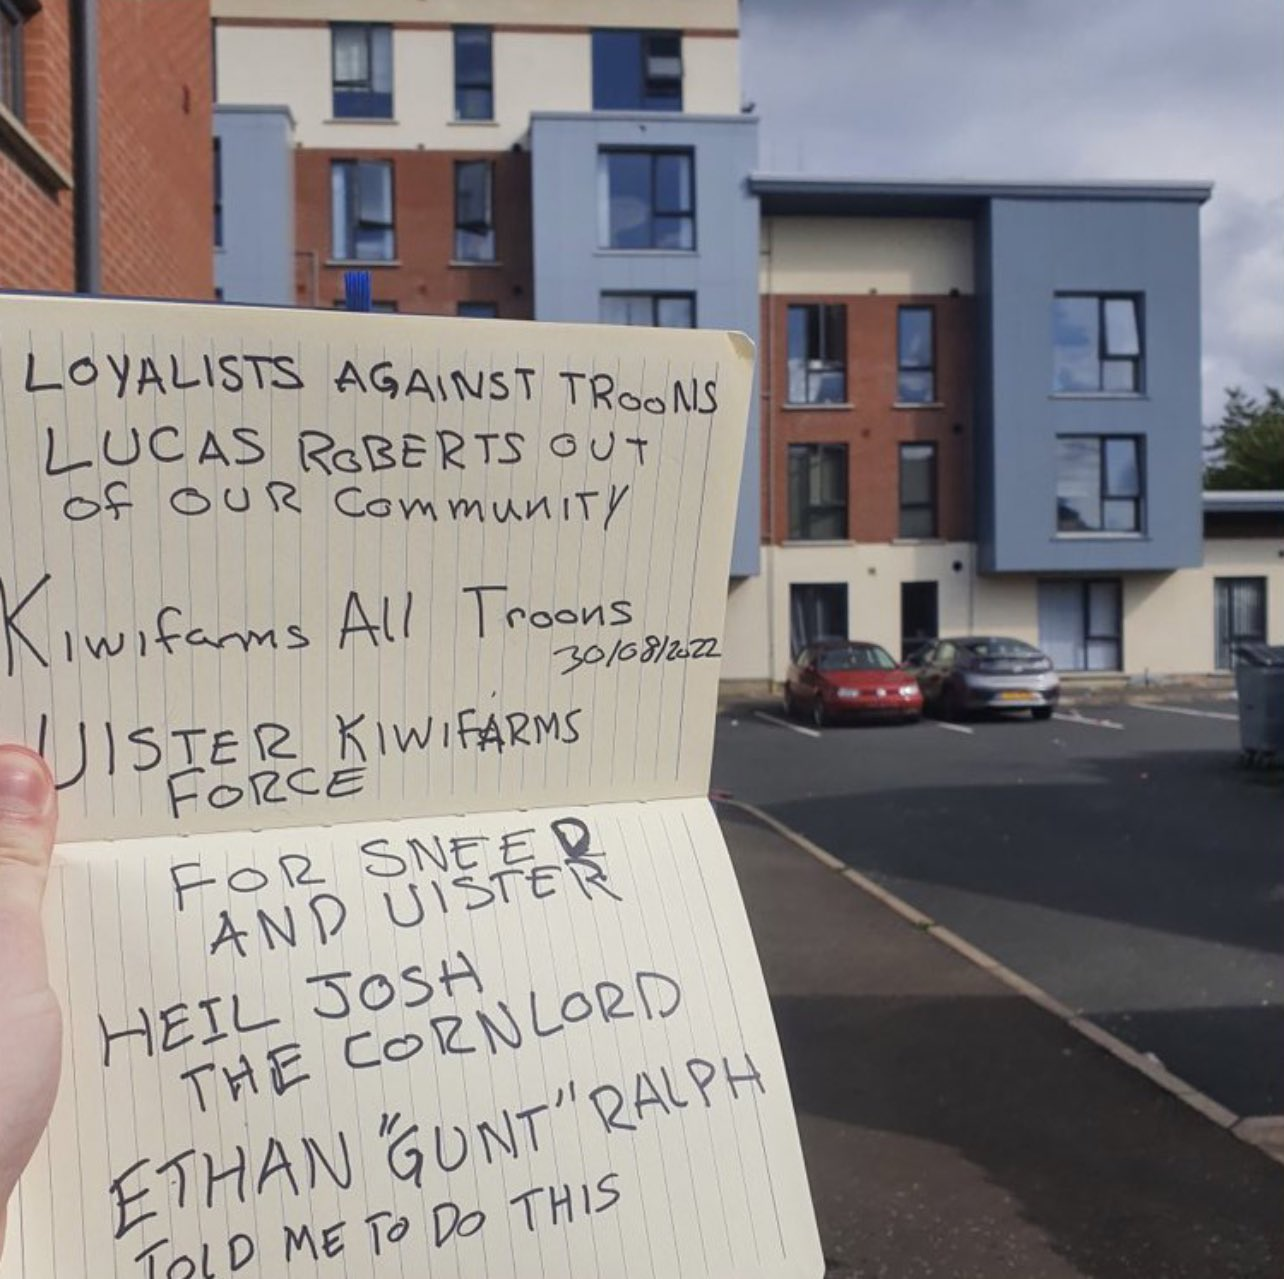 A hand holding a letter outside a block of flats. Letter reads "Loyalists against troons // Lucas Roberts out of our community // Kiwifarms all troons 30/08/2022 // Ulster Kiwifarms Force // For sneed and Ulster // Heil Josh the cornlord // Ethan "Gunt" Ralph told me to do this"